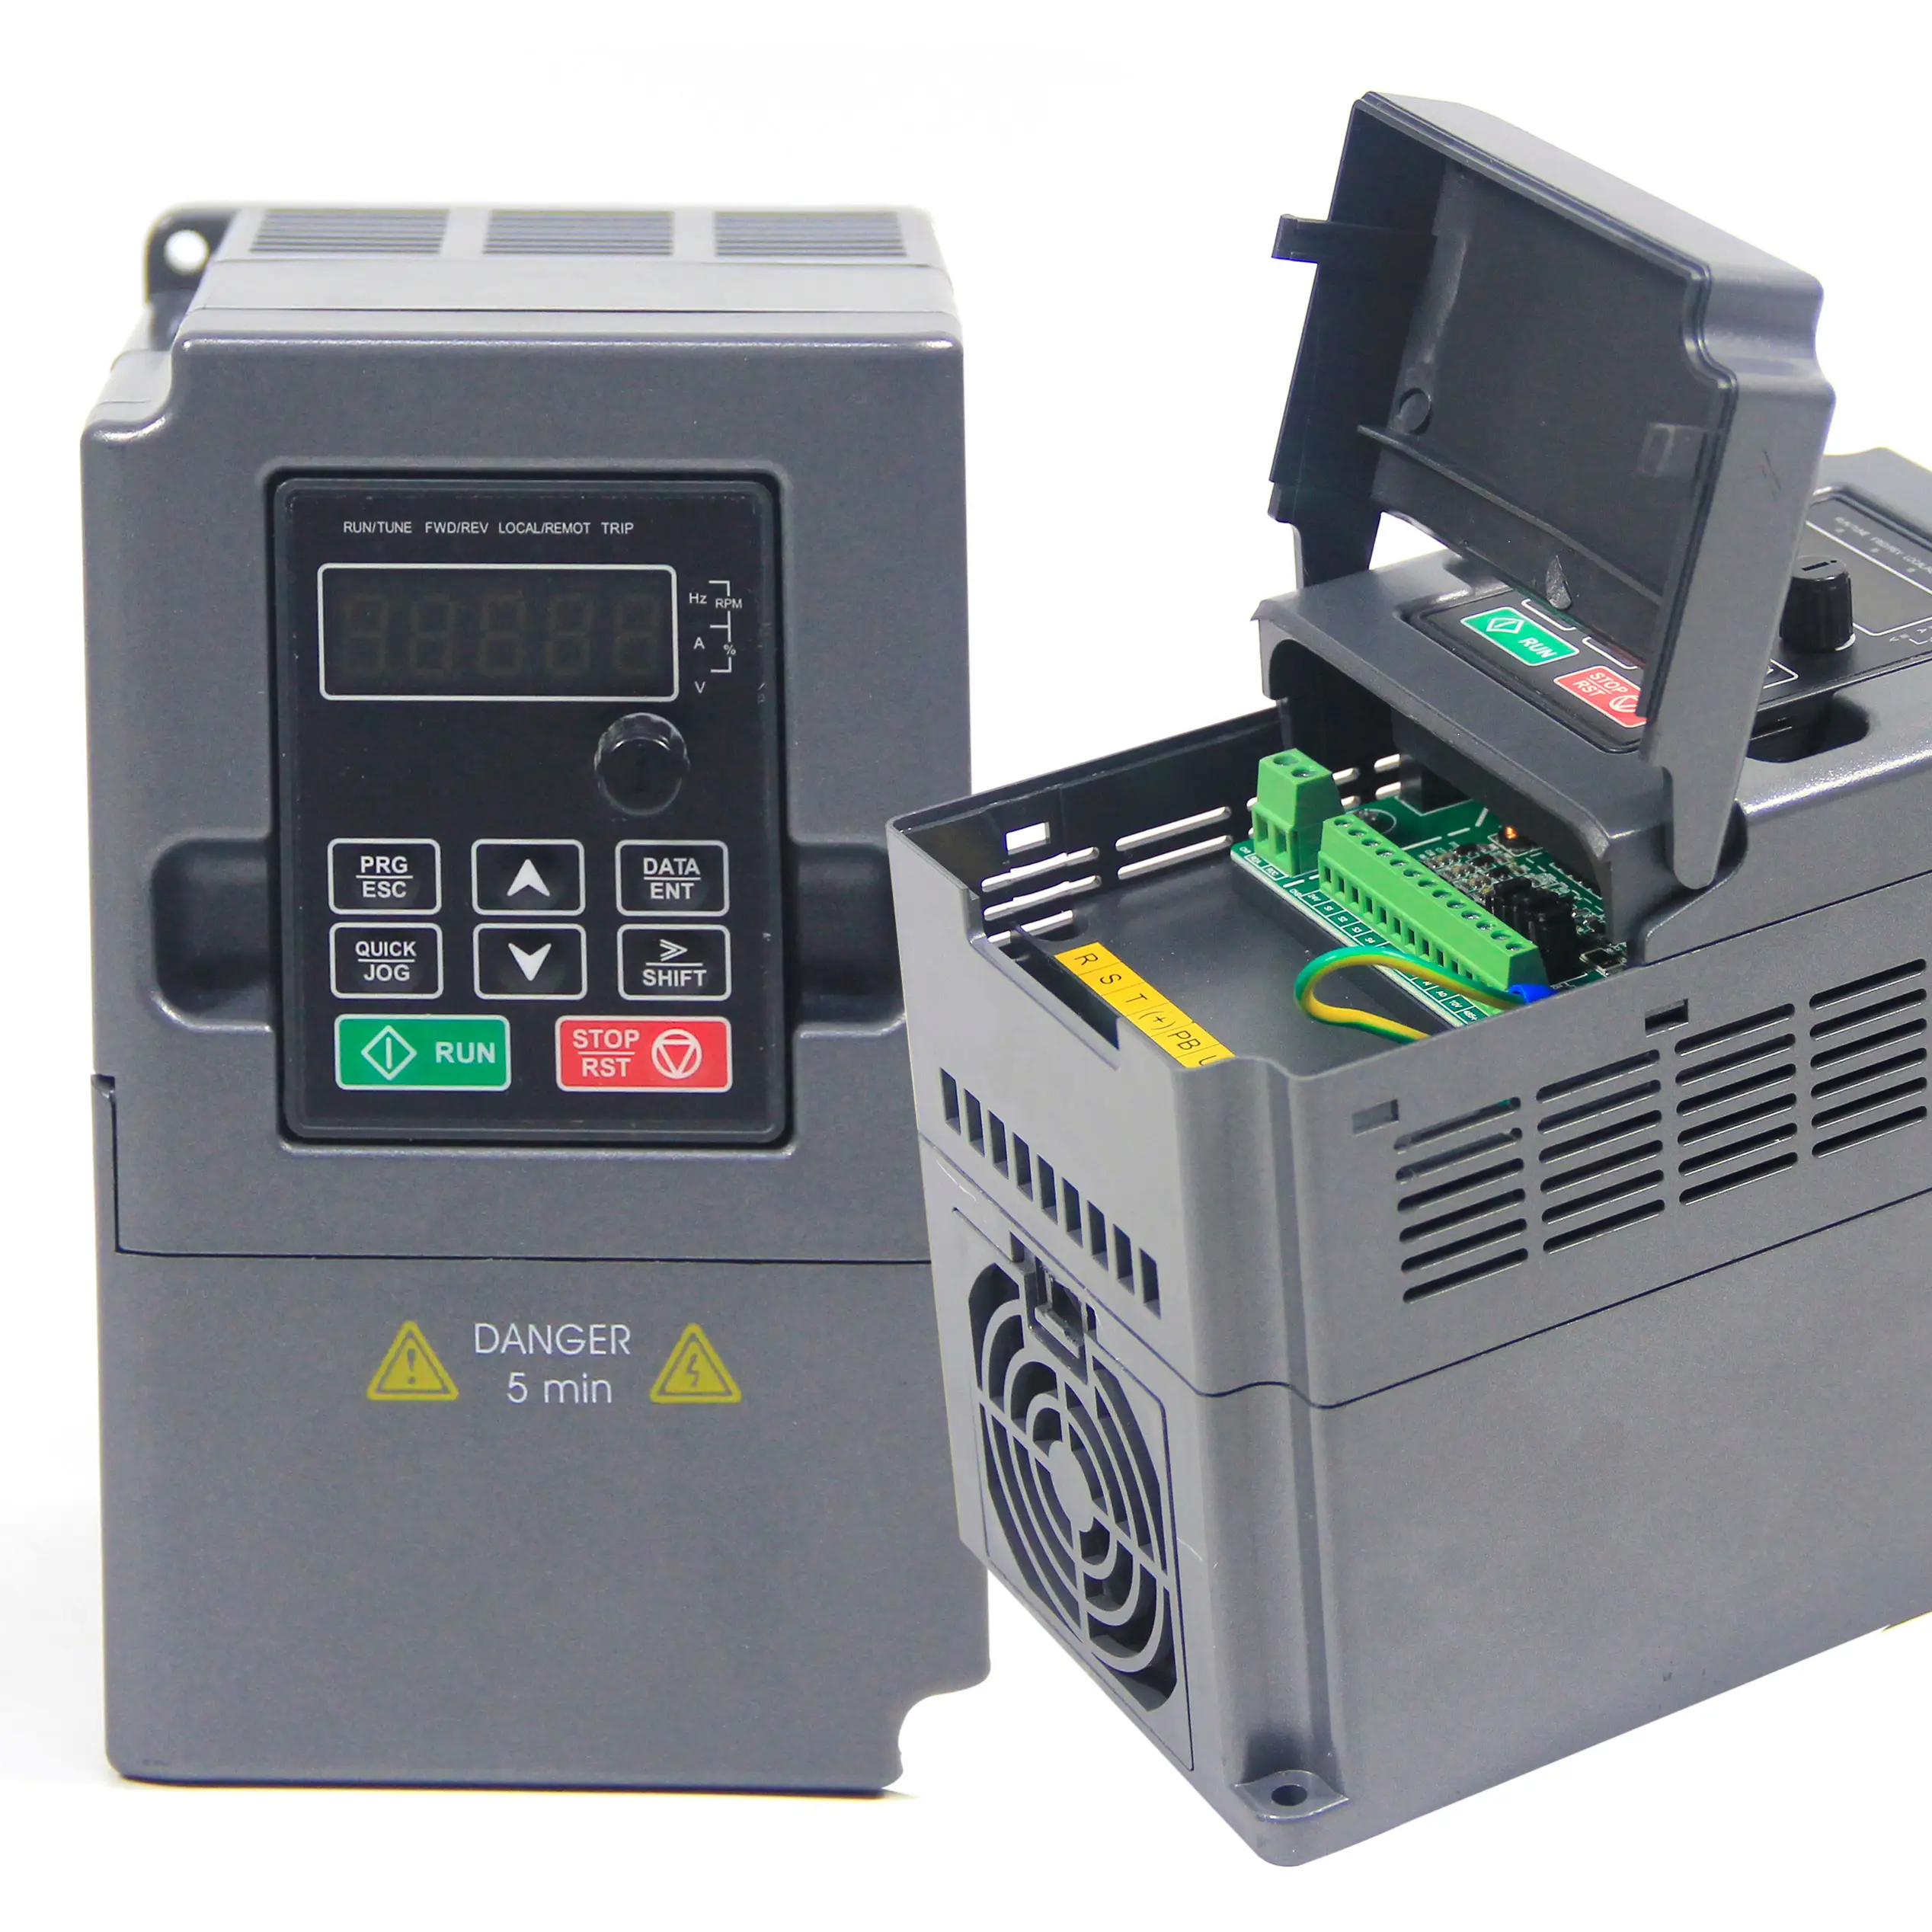 Hot Selling Factory Supply Directly AC VFD Variable Frequency Drive 1 Phase to 3 Phase 220V Inverter for motor